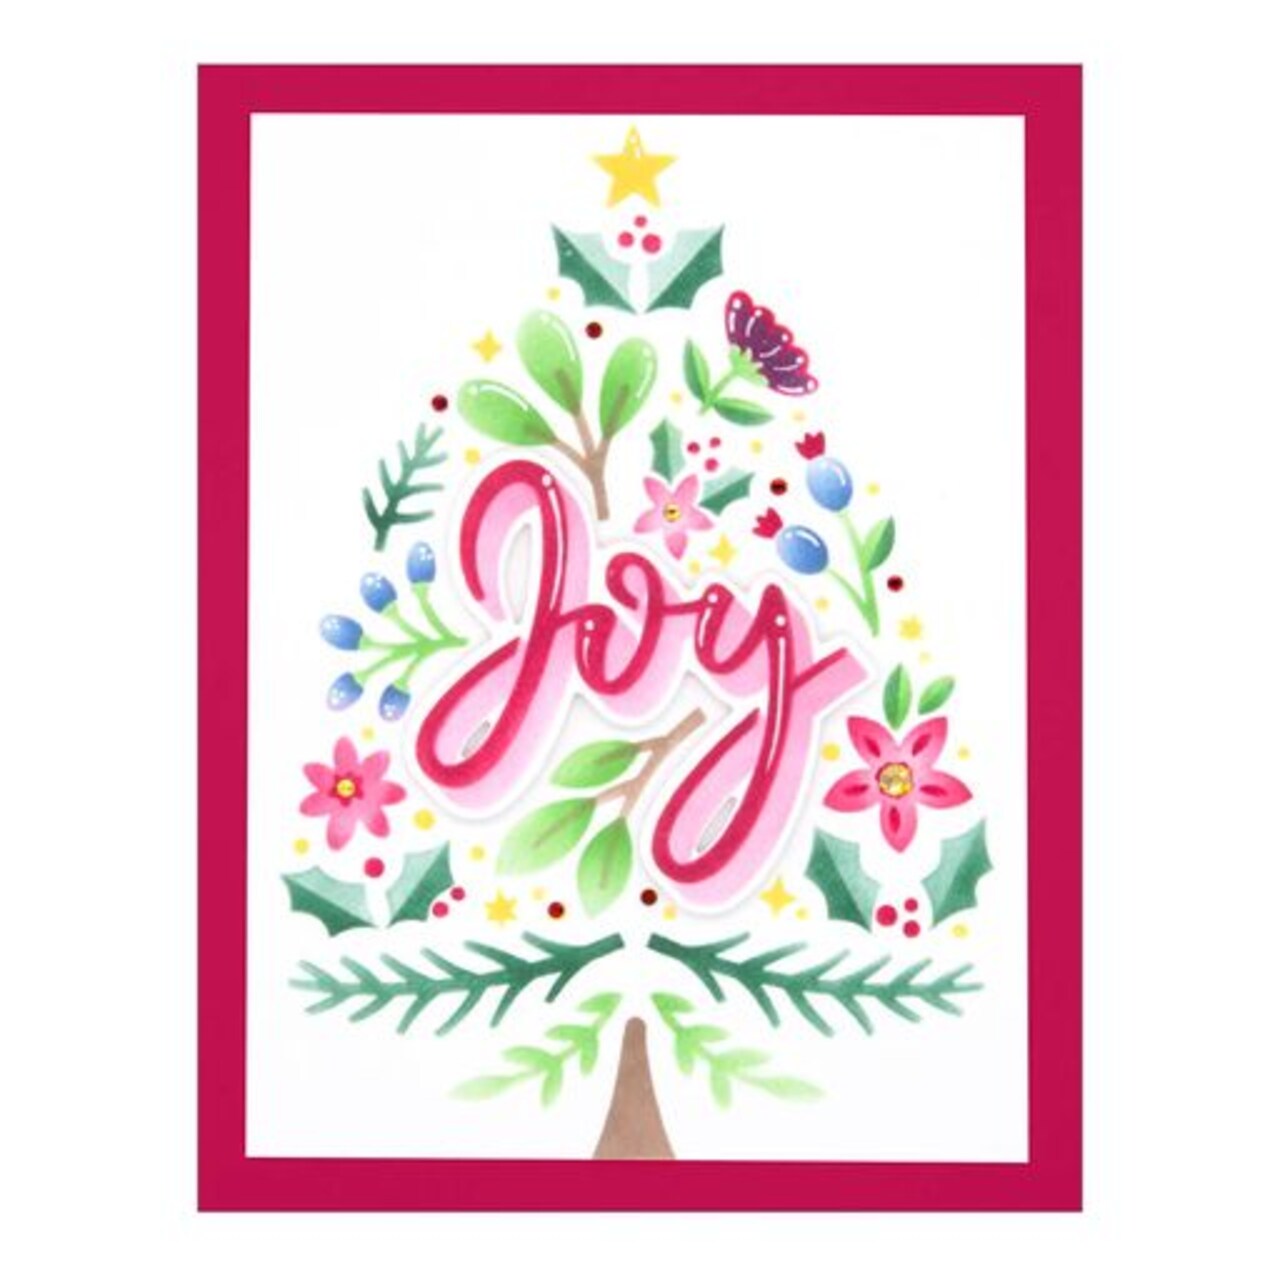 Spellbinders Layered Joy Tree Stencils from the Layered Christmas Stencils  Collection